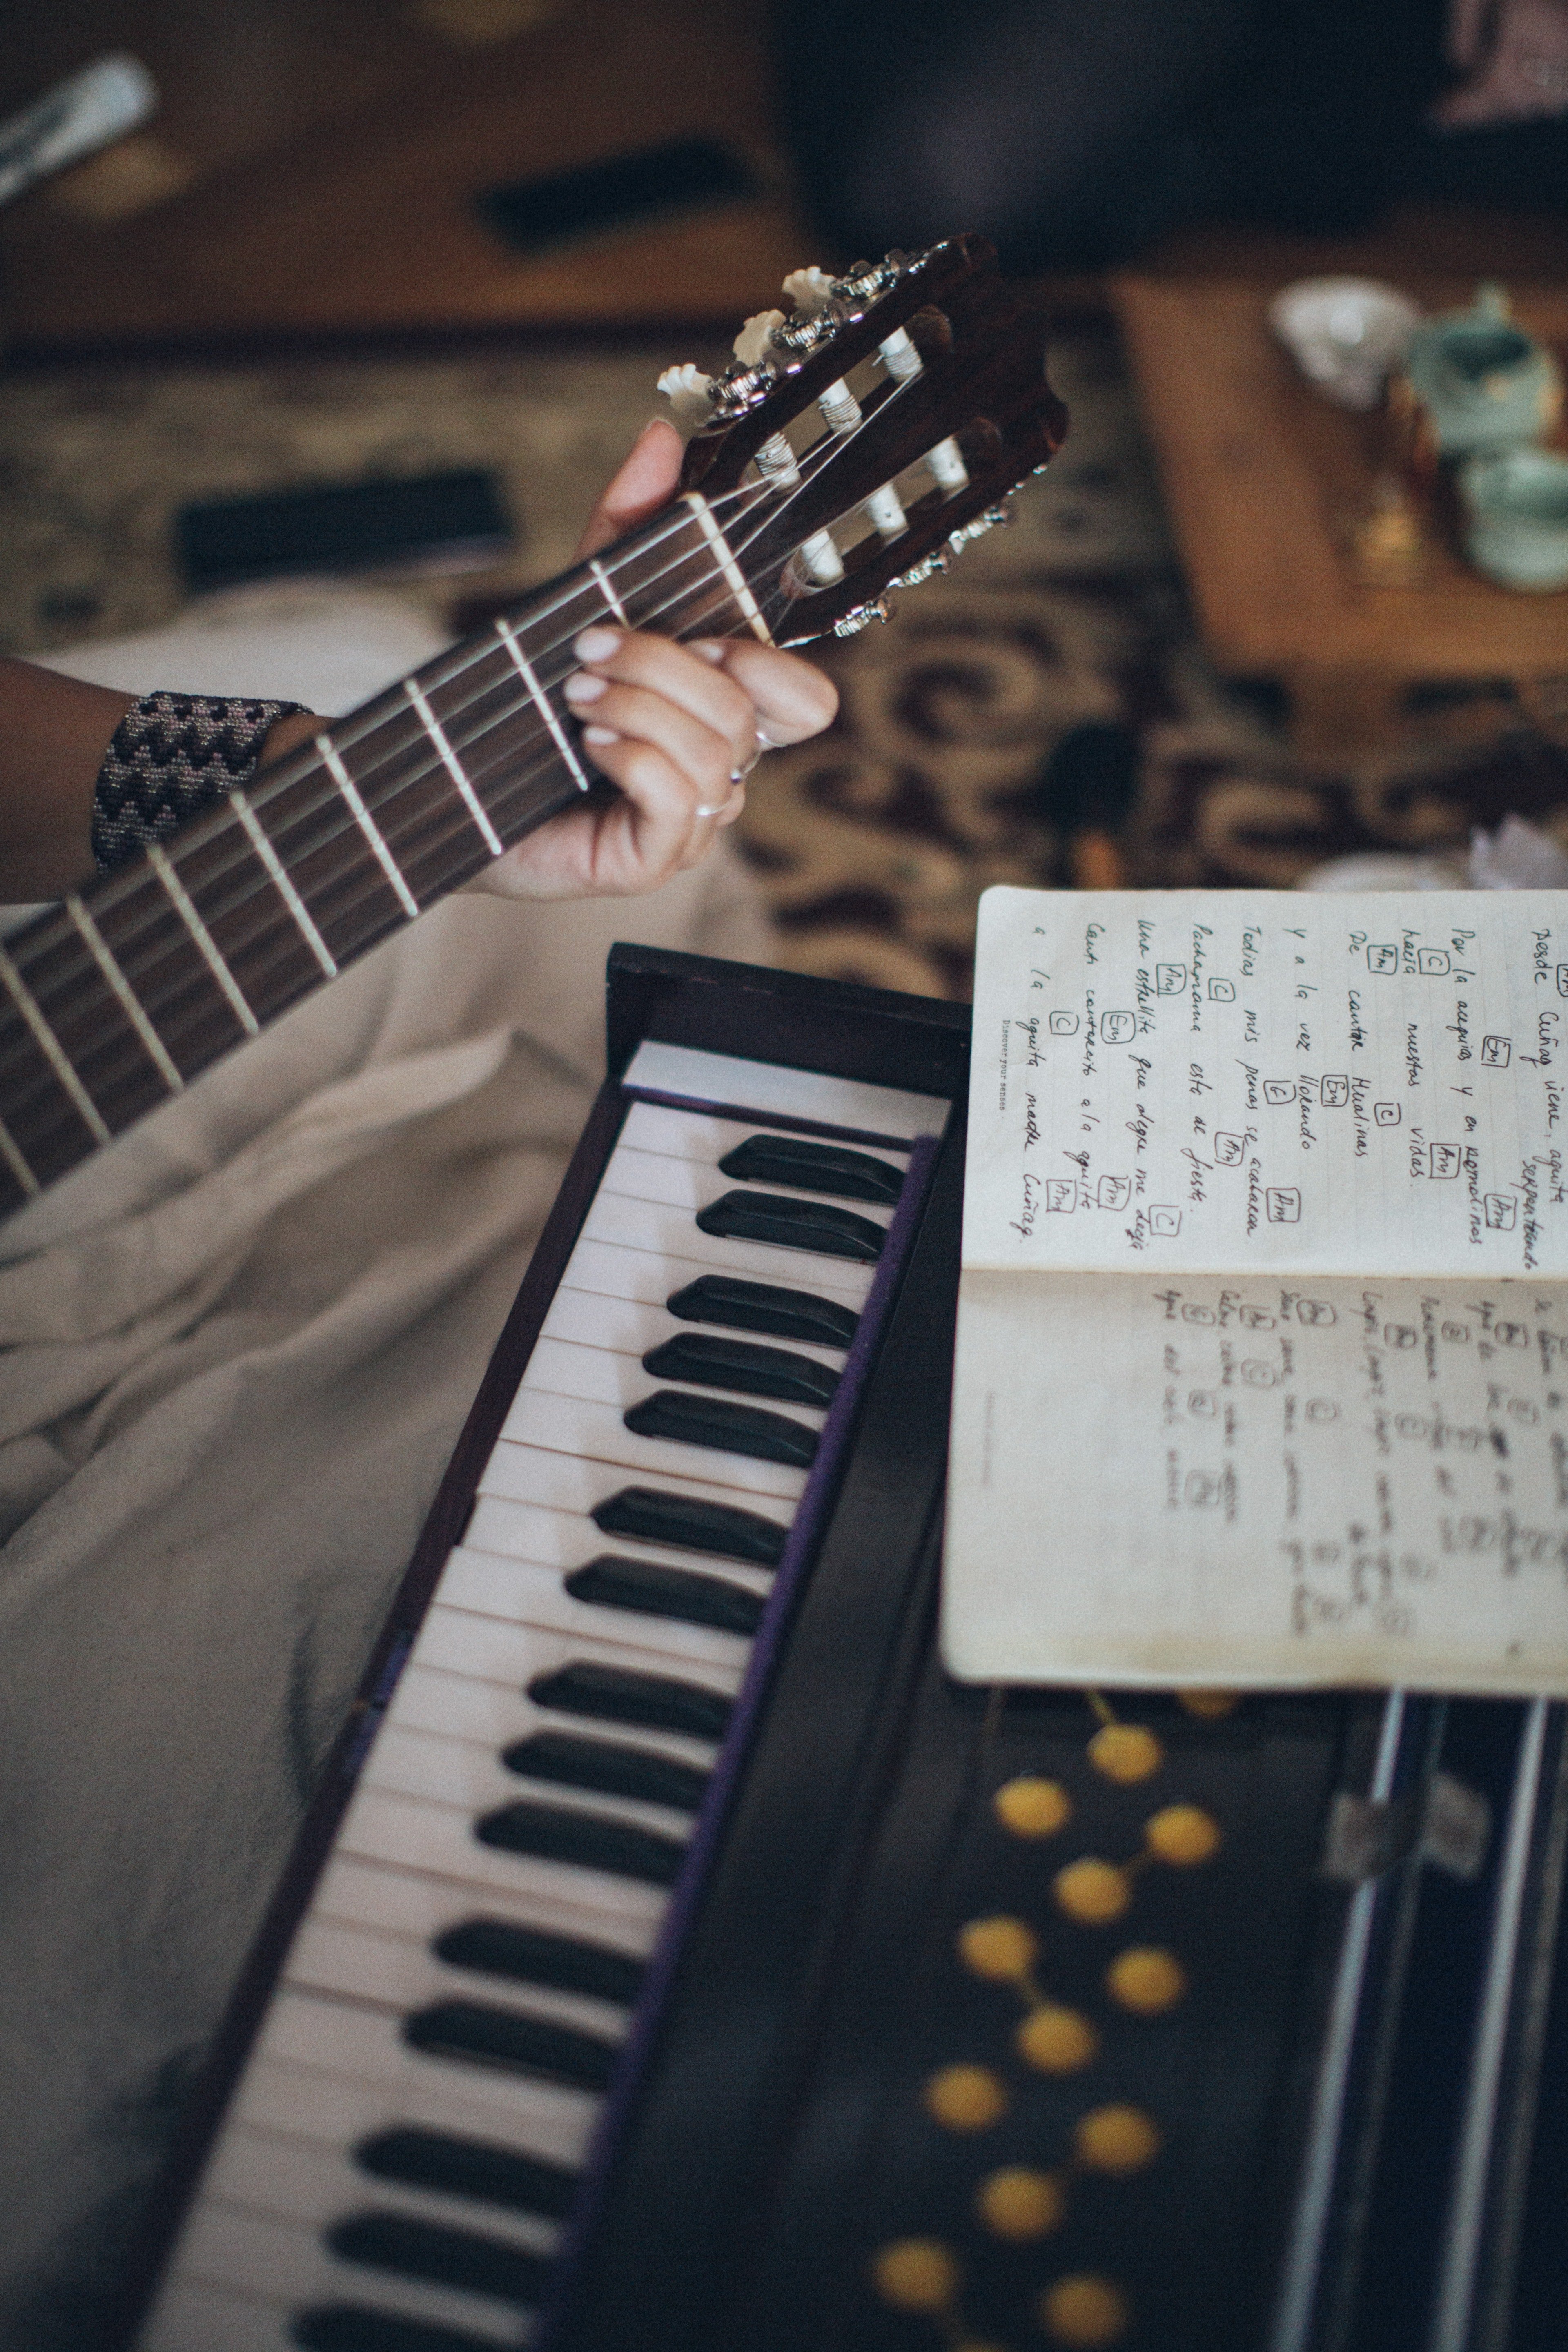 Mrs. Murphy helped Simon learn to play the guitar. | Source: Pexels